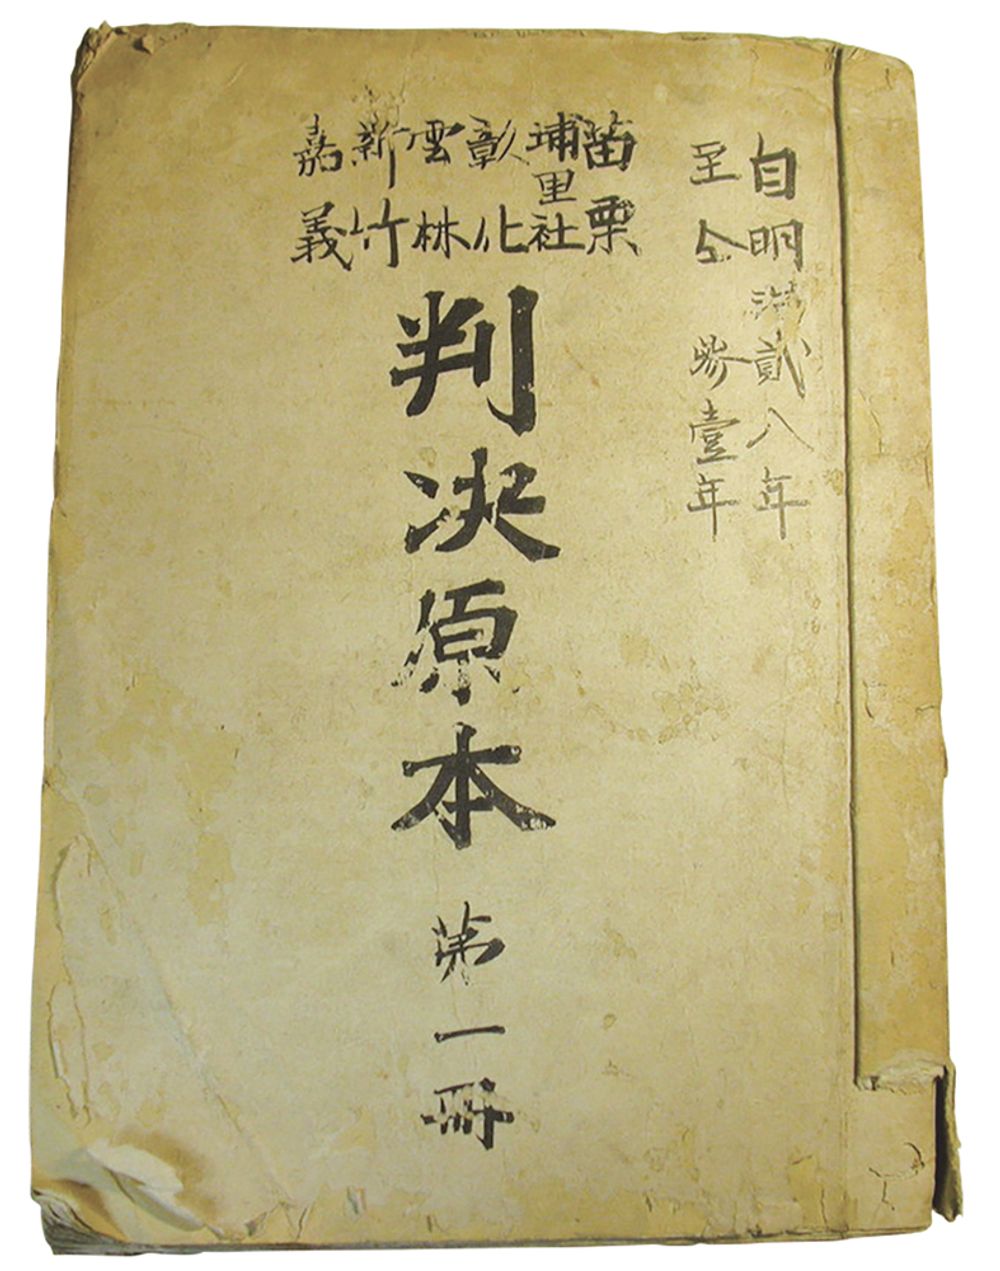 Original Copy of the Judgment of colonial district courts since 1895